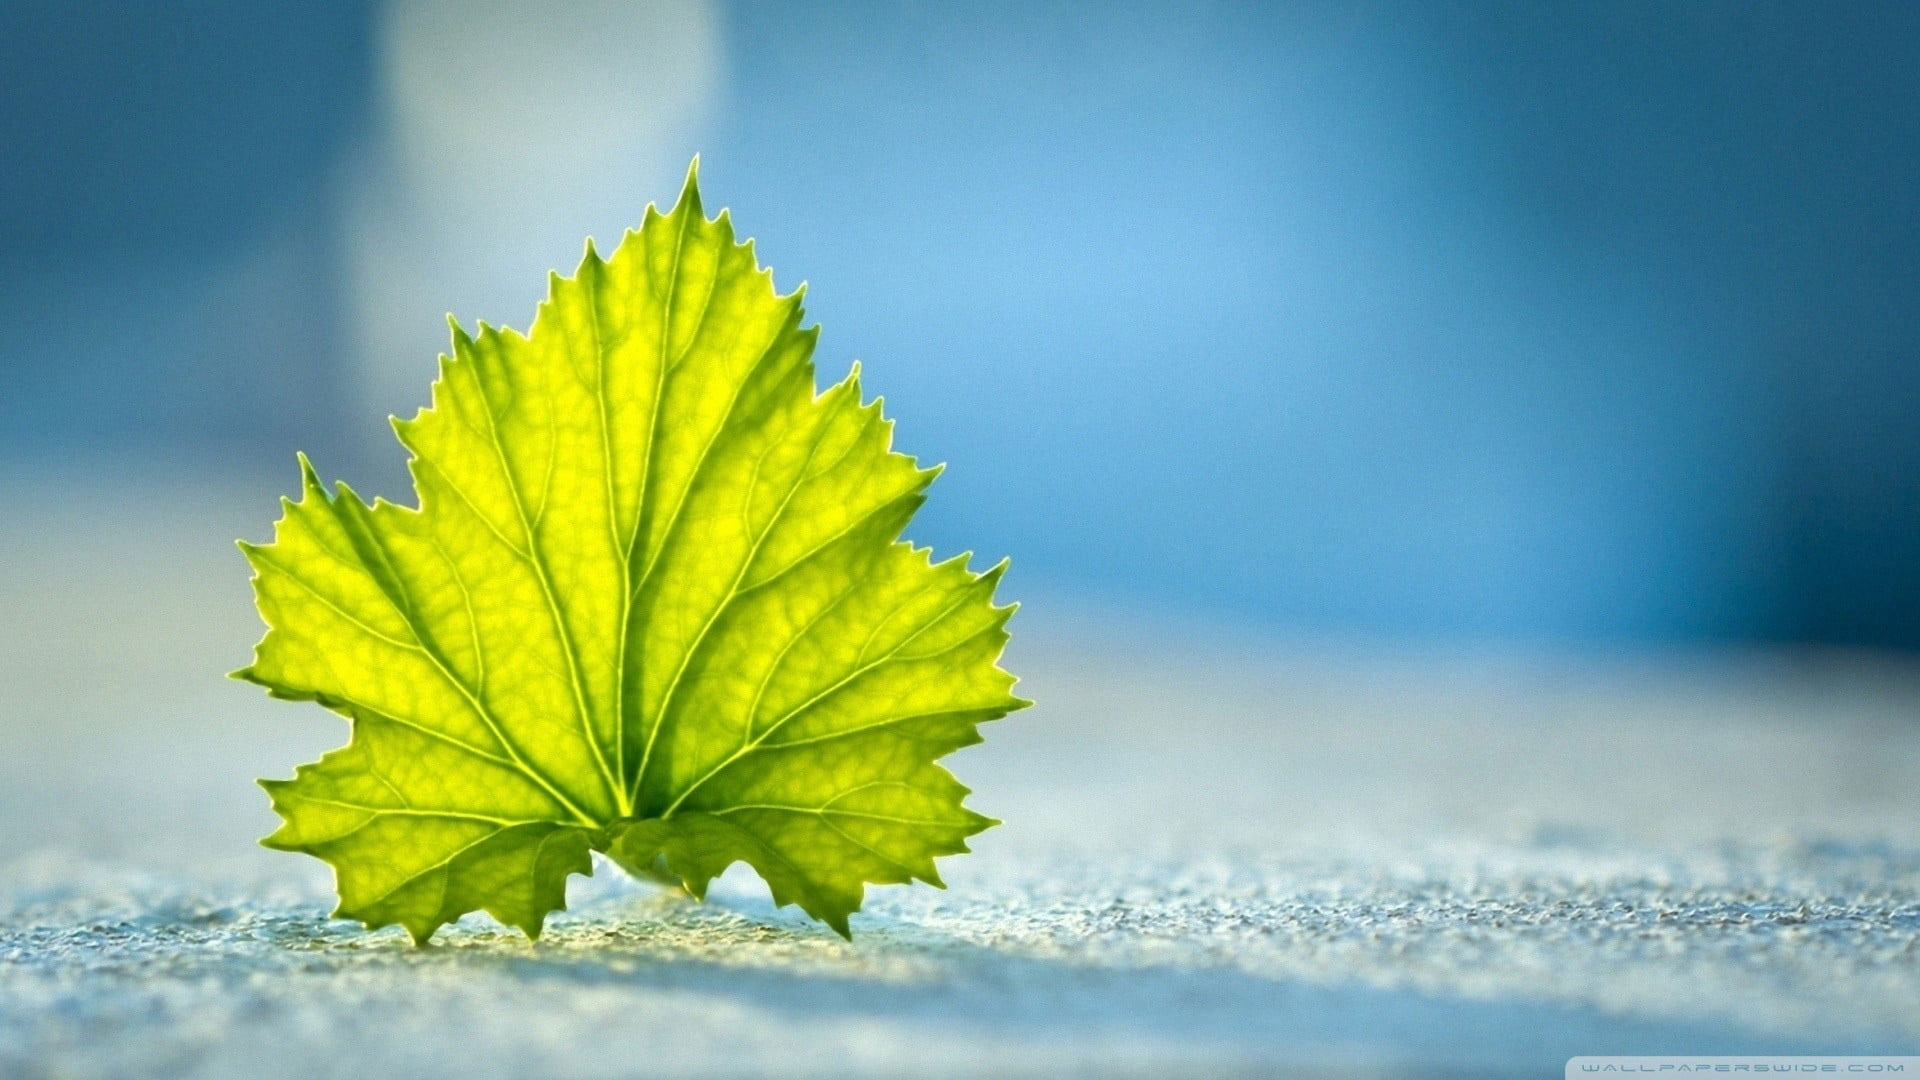 Green leaf wallpaper, selective focus photography of green leaf, nature